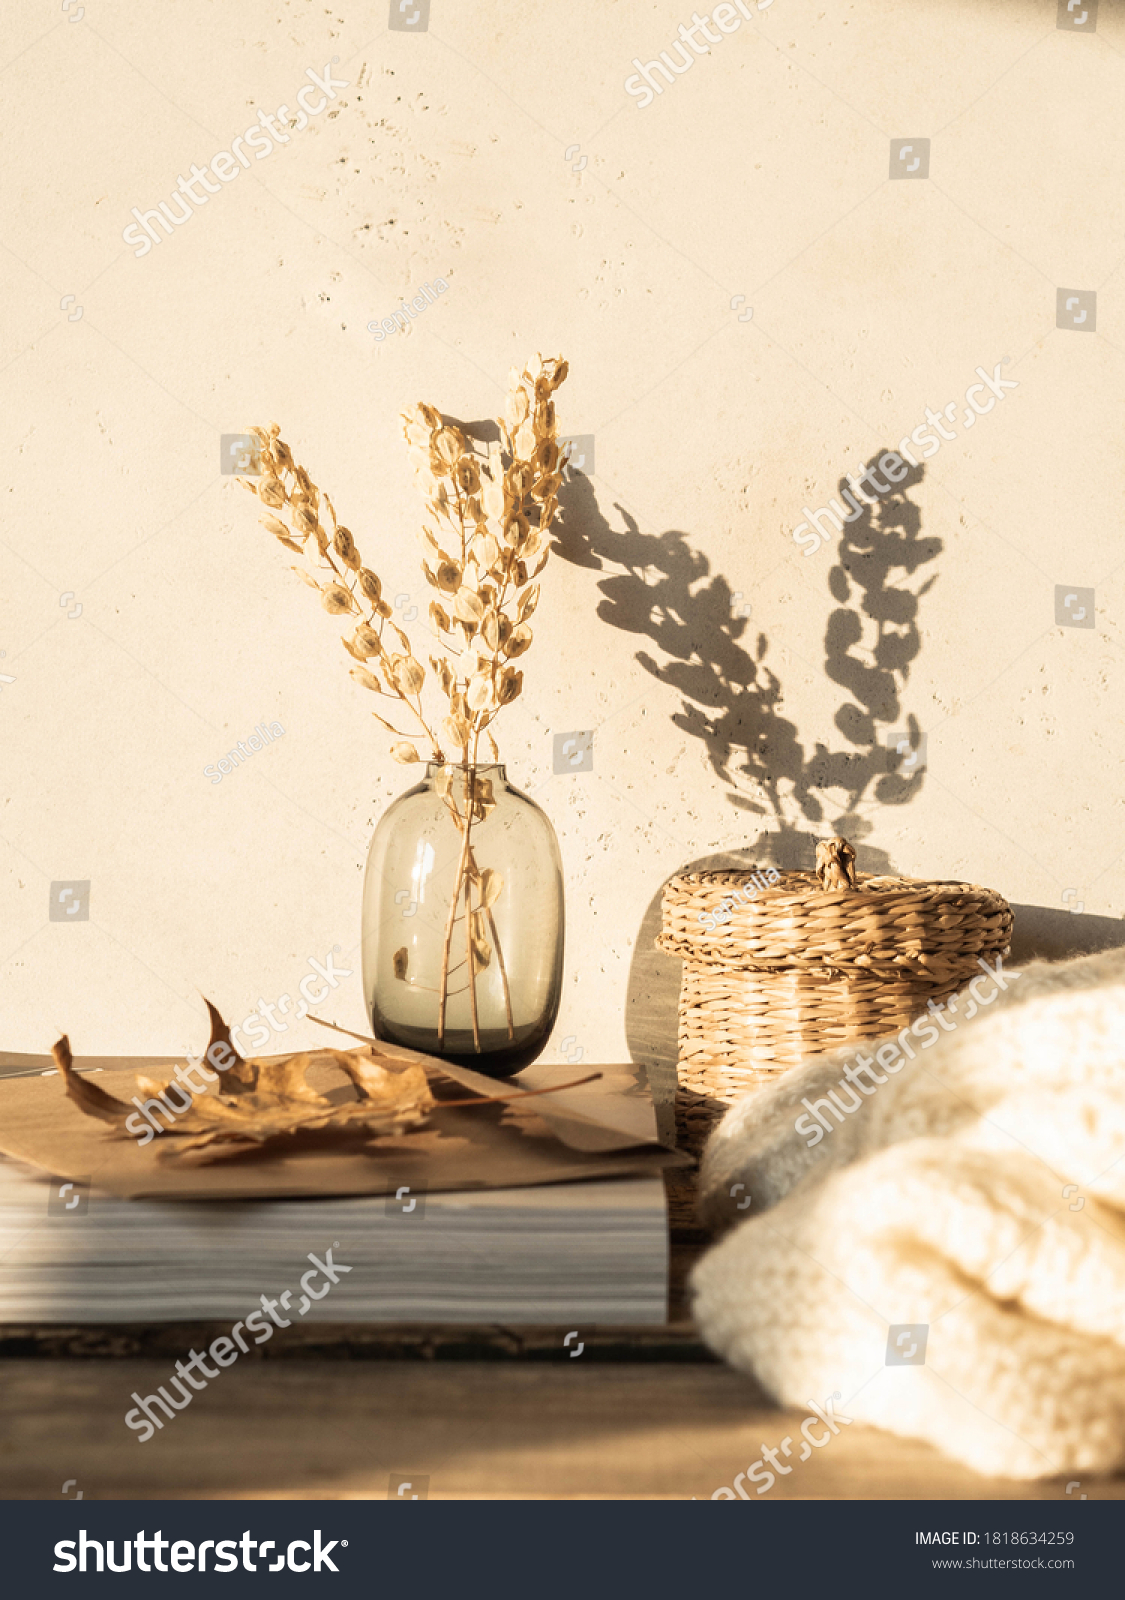 Cozy autumn home still life of dry flowers in vase, straw box, knitted blanket and magazines on rustic wooden table and shadows on the wall from the bright setting sun #1818634259